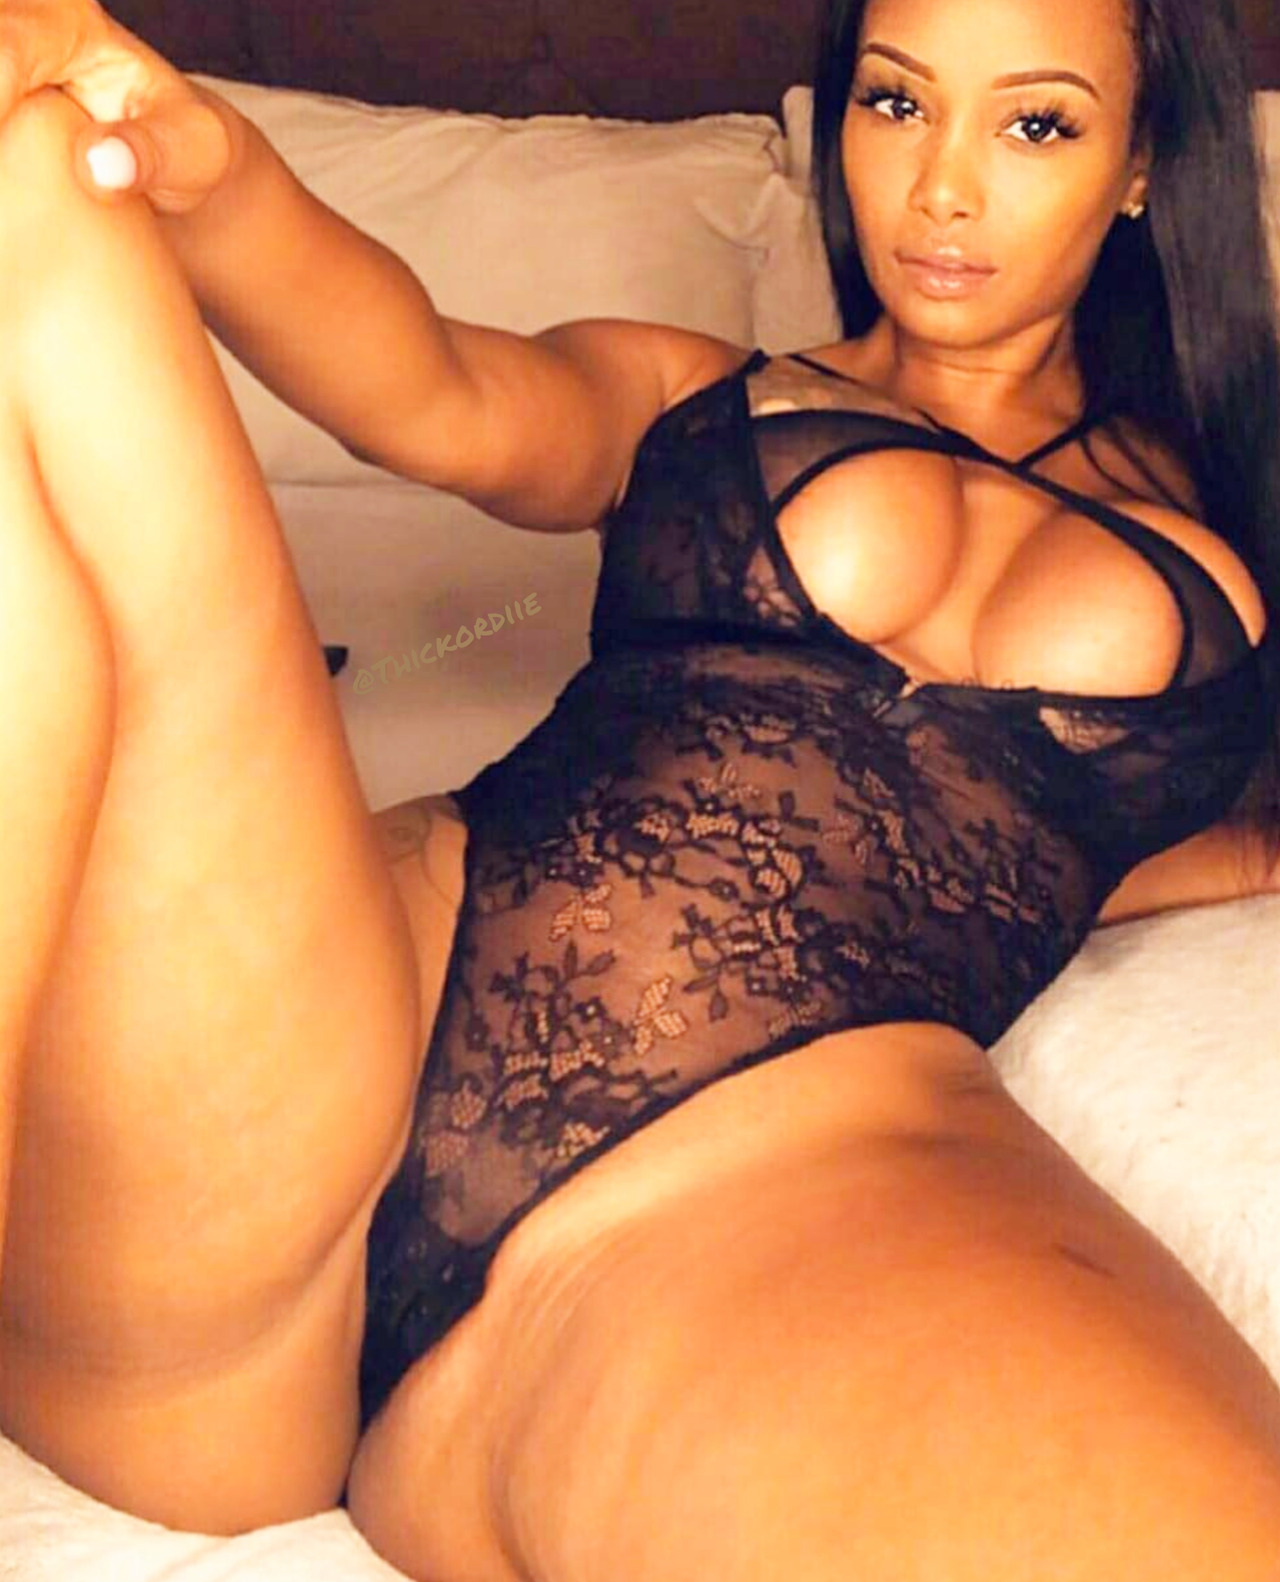 thickordie: Fawking Dream Come True… ShaKKA…🤣 ….#gogetter #goodmorning #gold #music #myears #candy #turkey #turkeyday ……..#macandcheese #mommomashouse #thanksgivingday #Gramahouse #turkey #stuffing #cornbred #stockings #Greens #thouroughbred